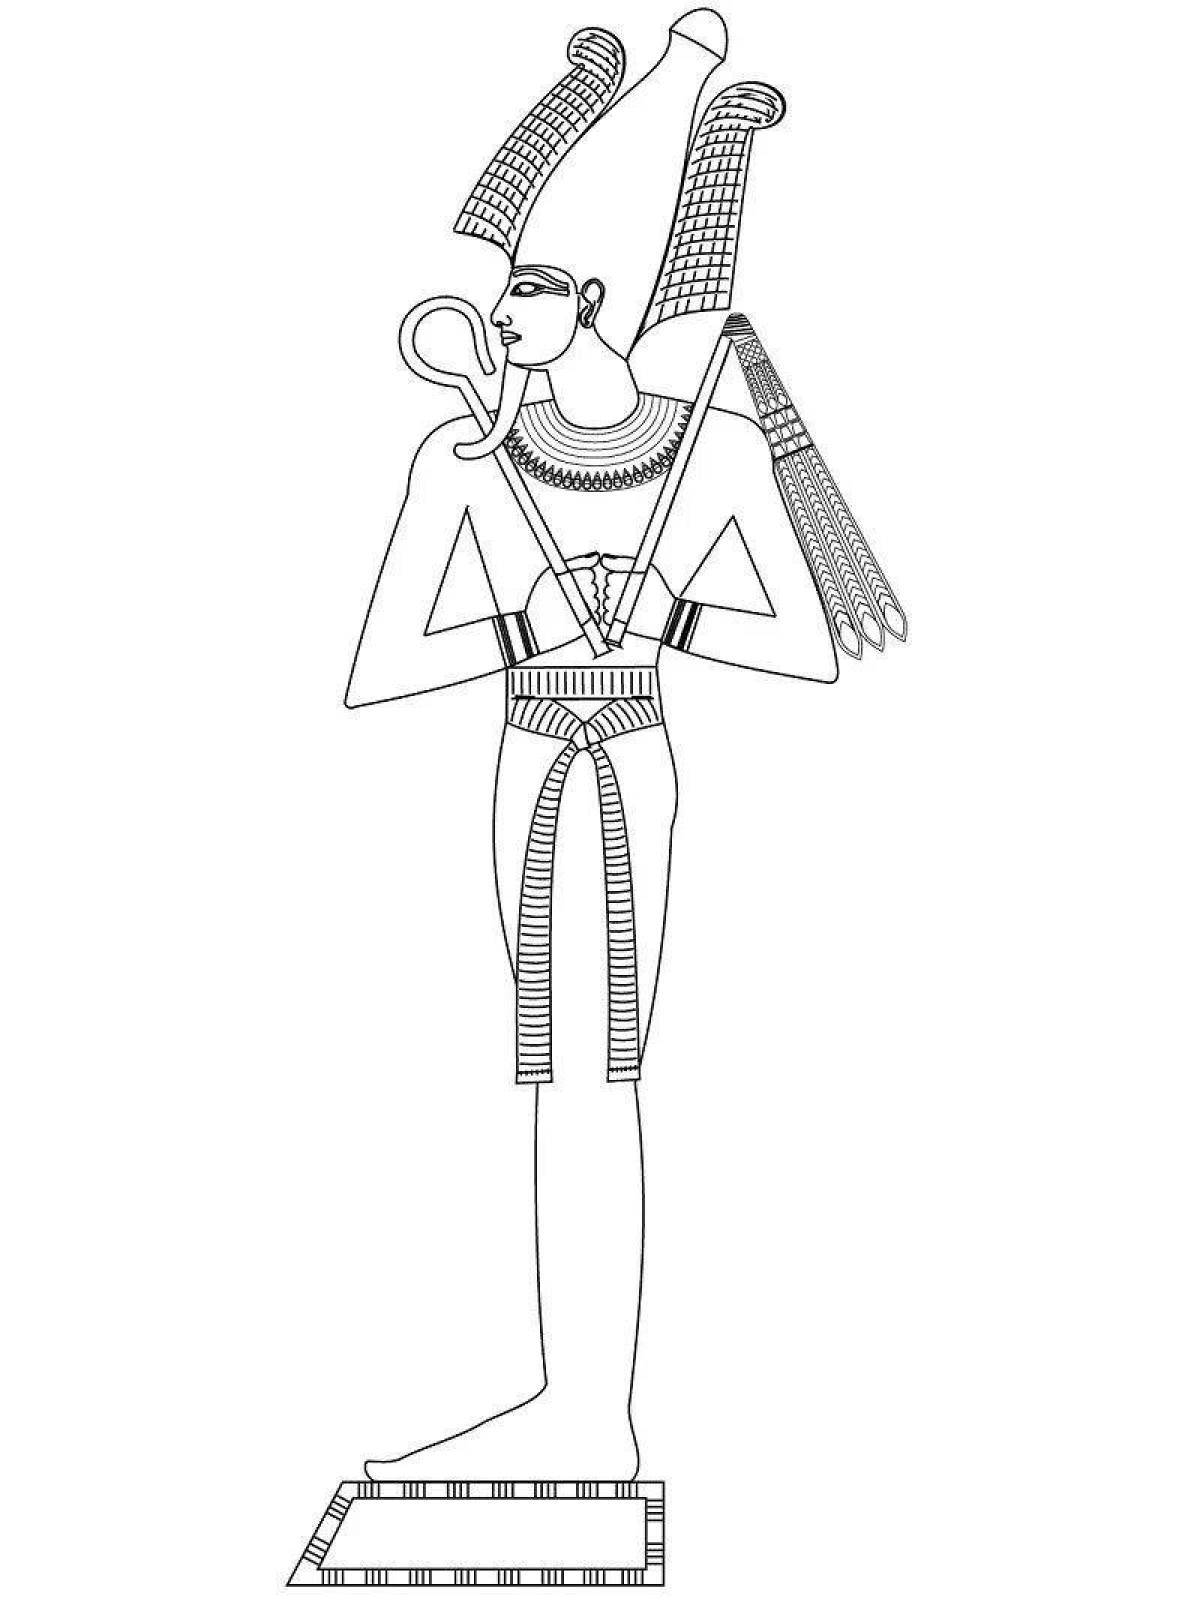 Exquisite egyptian gods coloring book